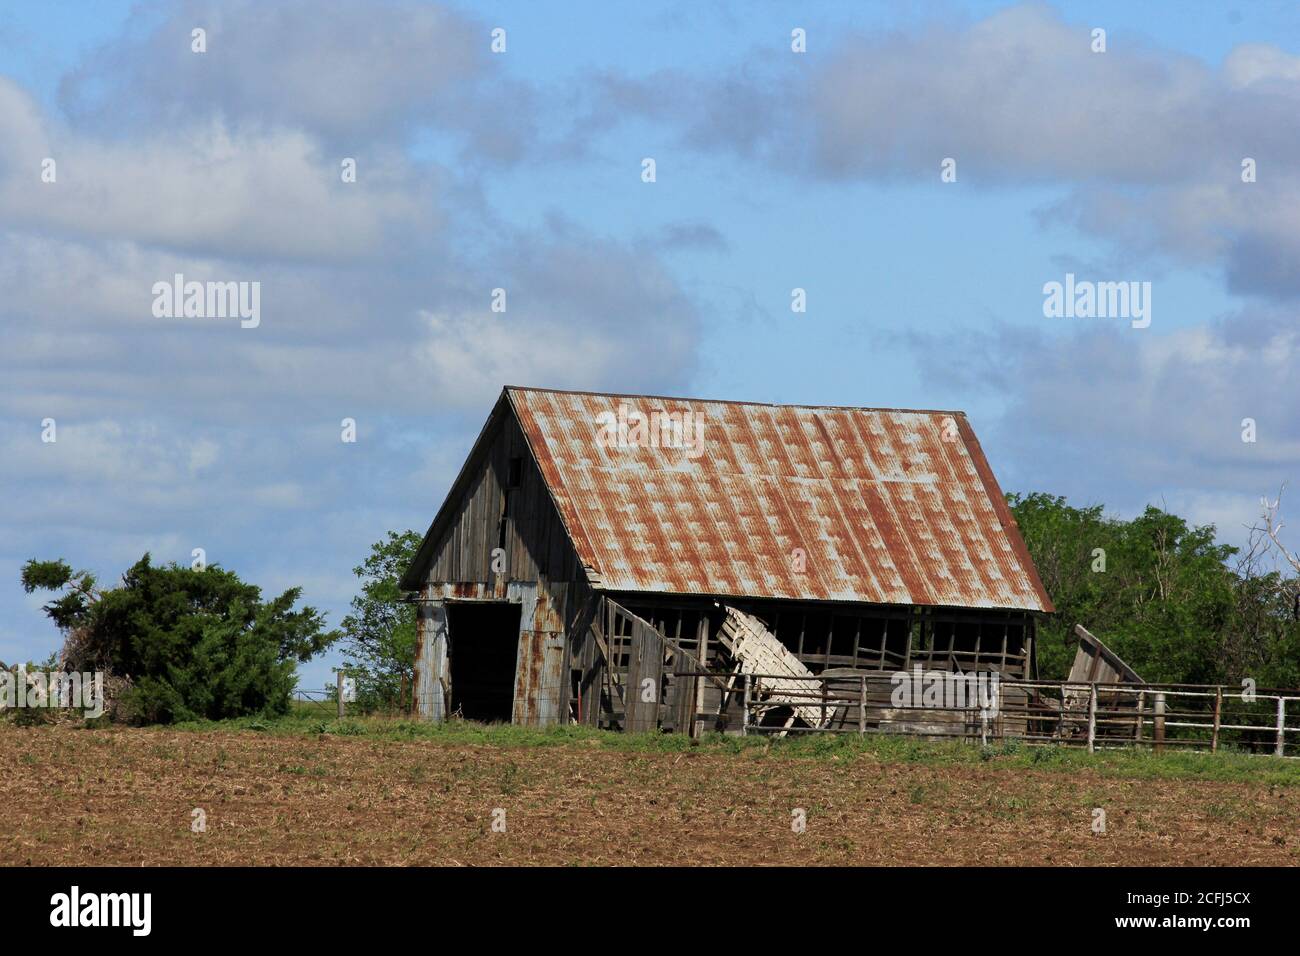 Kansas Country barn with a corral,tree's,blue sky and white cloud's out in the country. Stock Photo